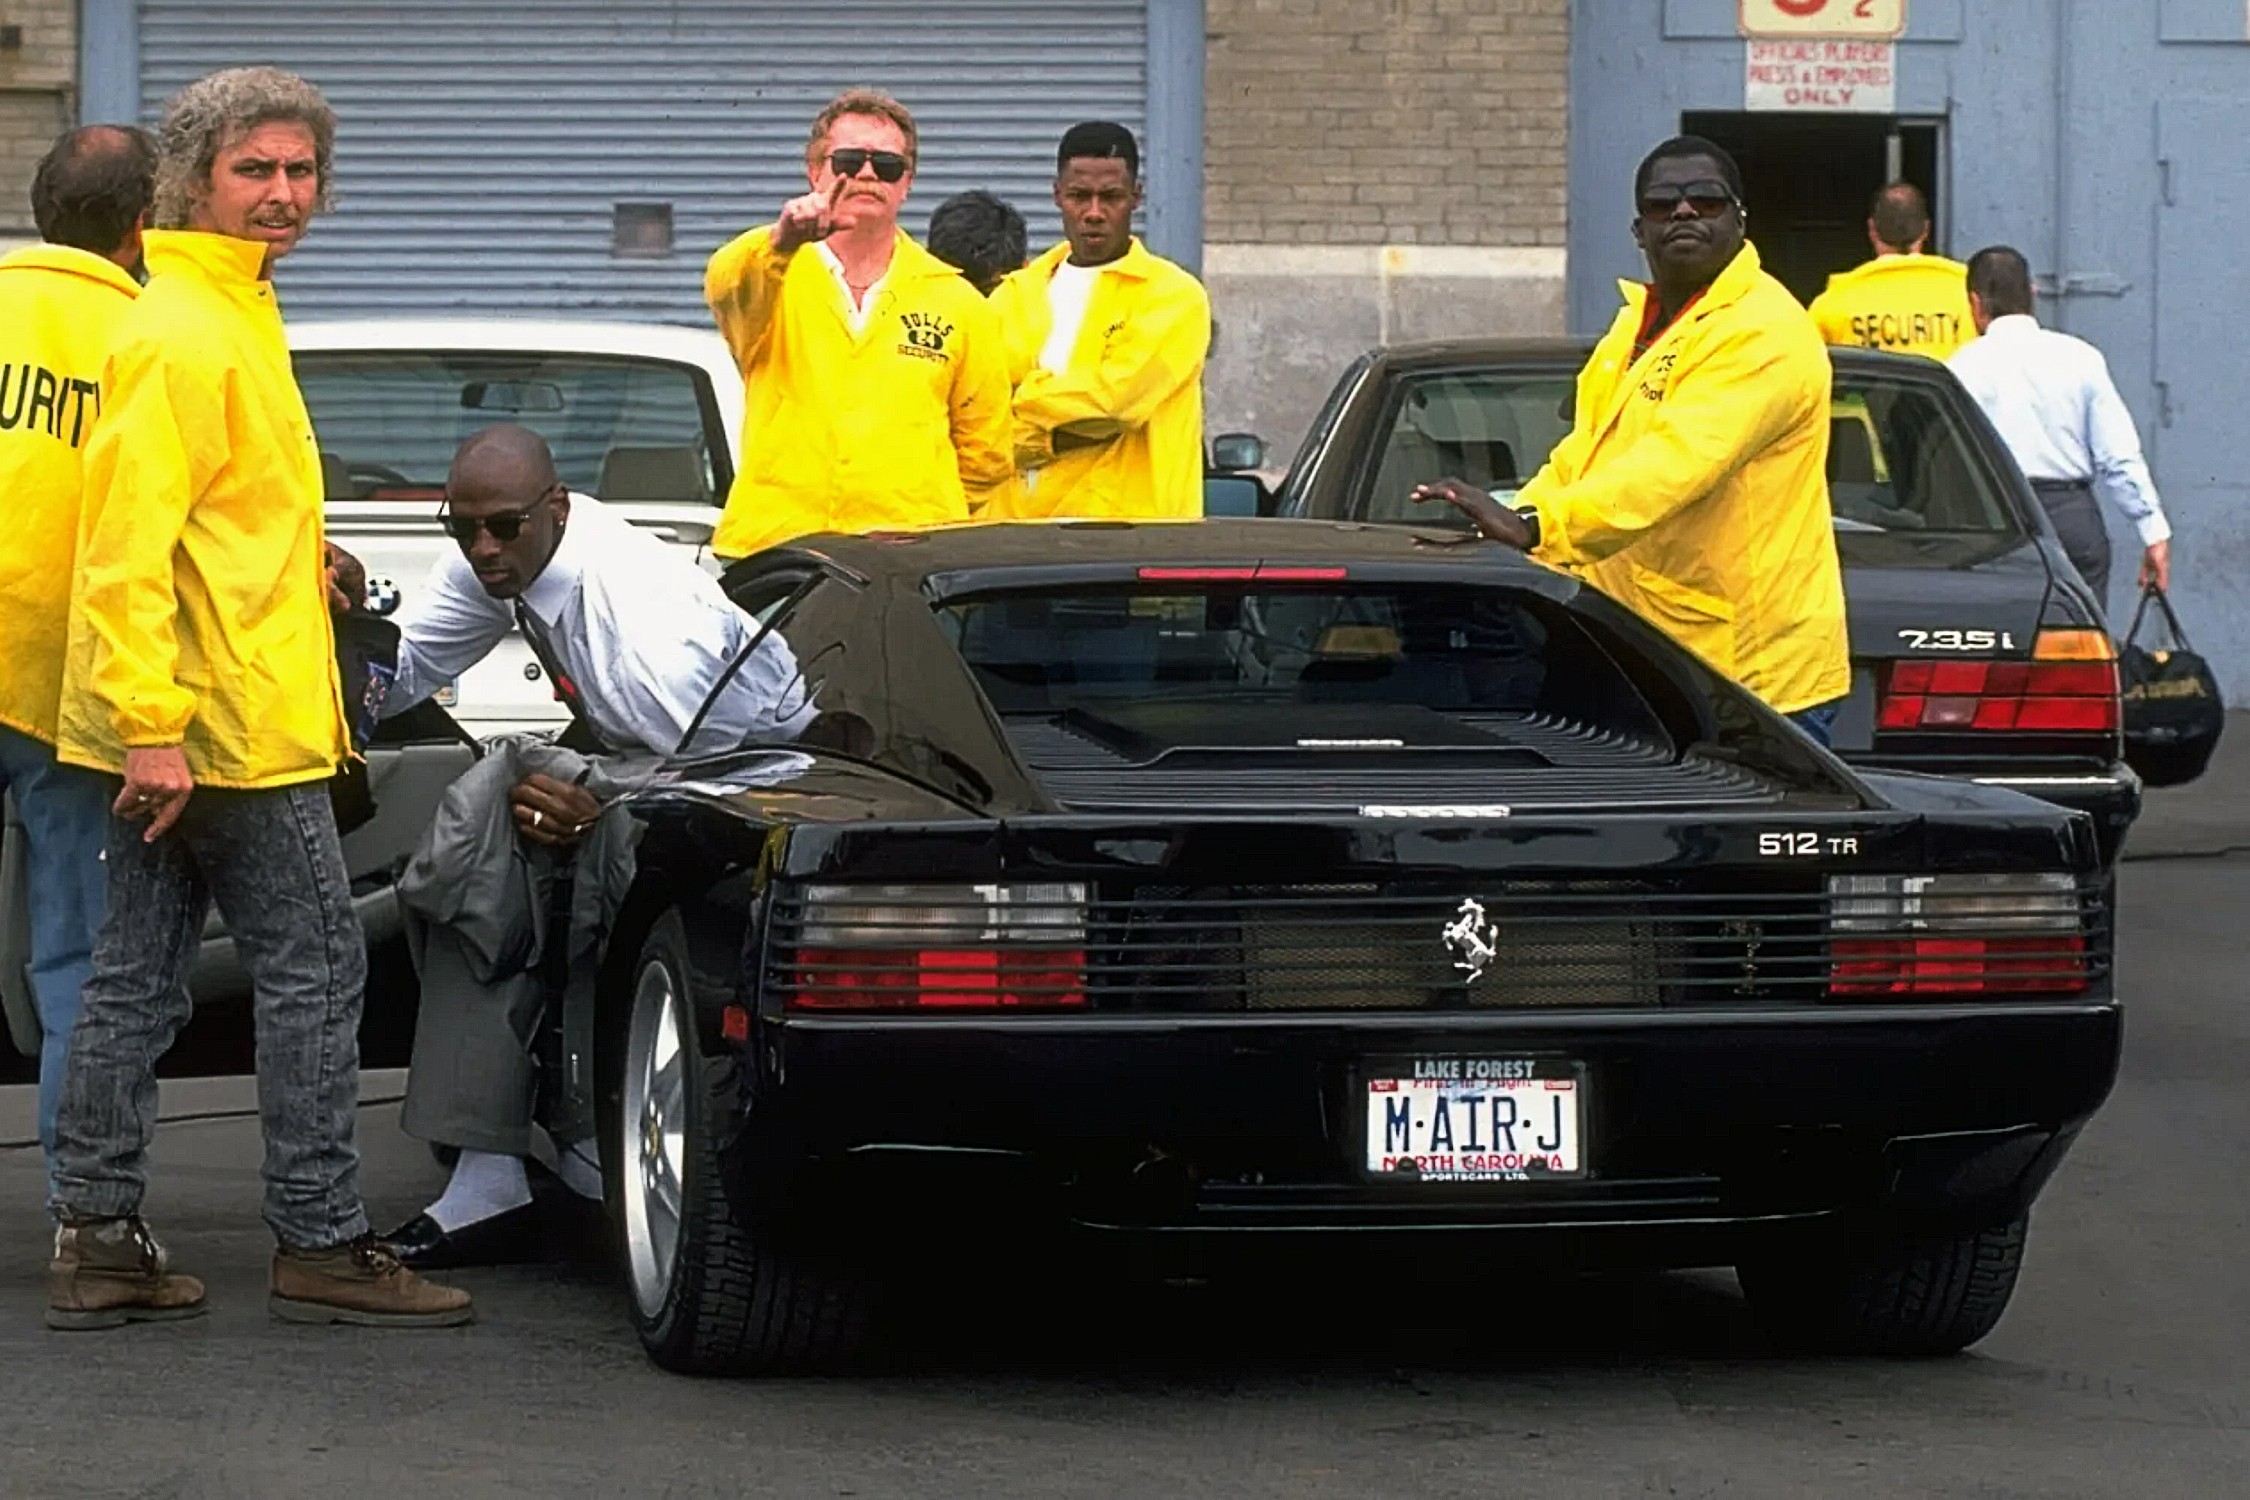 bao michael jordan surprised everyone when he auctioned off his favorite ferrari tr for charity to make people s dreams come true 6522a0d5740a9 Michael Jordan Surprised Everyone When He Auctioned Off His Favorite Ferrari 512 Tr For Charity To Make People's Dreams Come True.